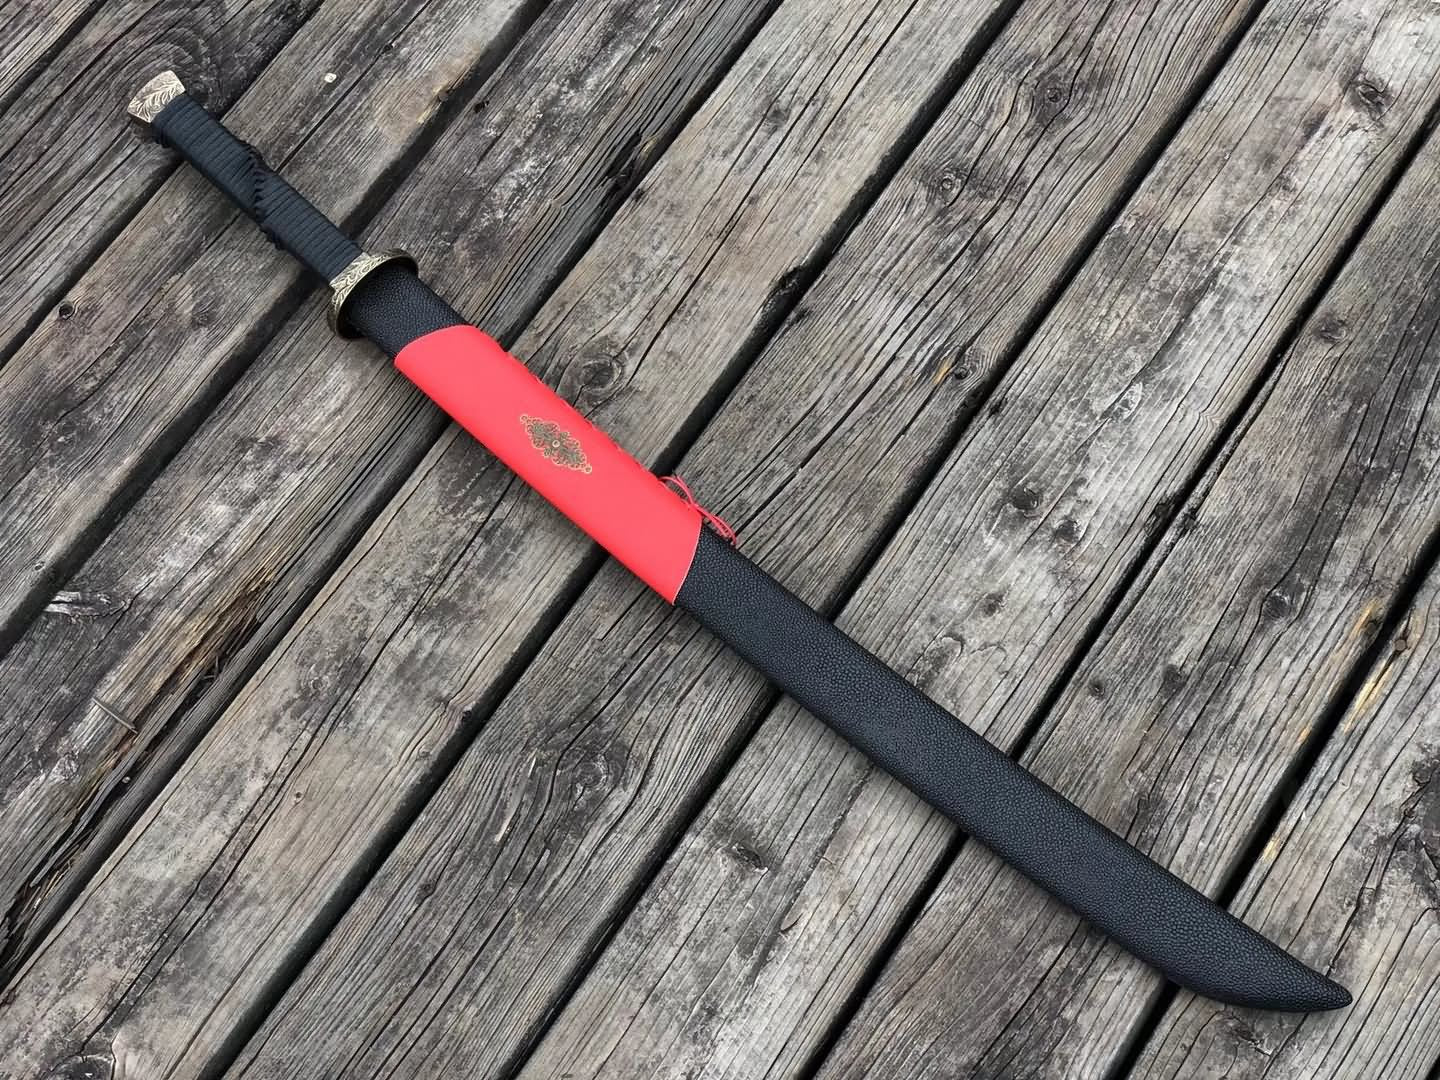 Invisible Sabre,Forged high carbon steel,Leather scabbard,Chinese sword